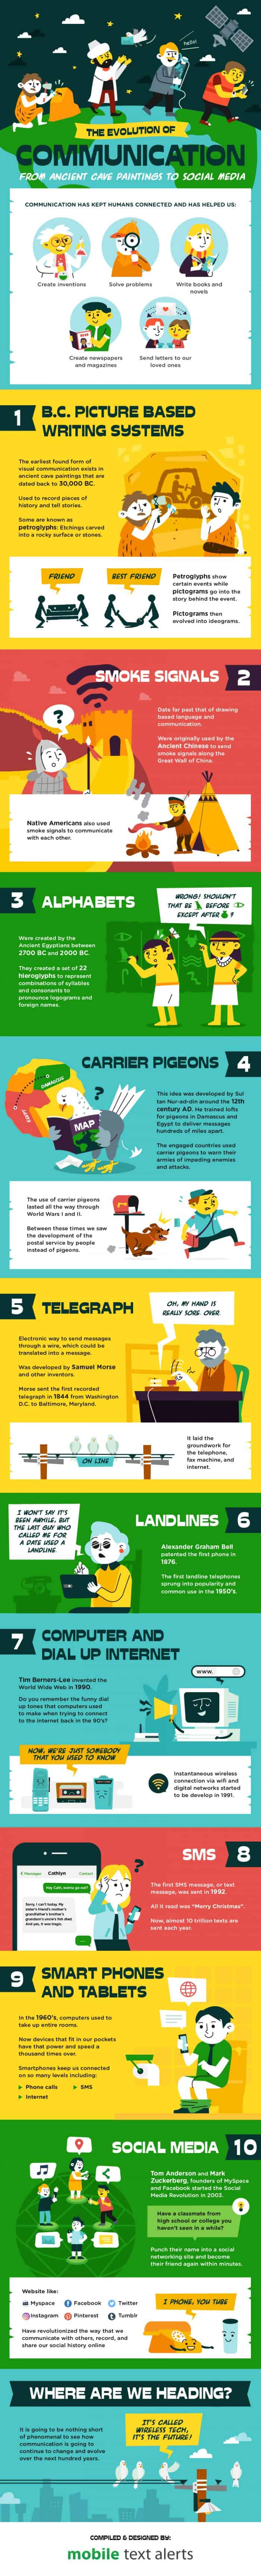 infographic describes the evolution of communication